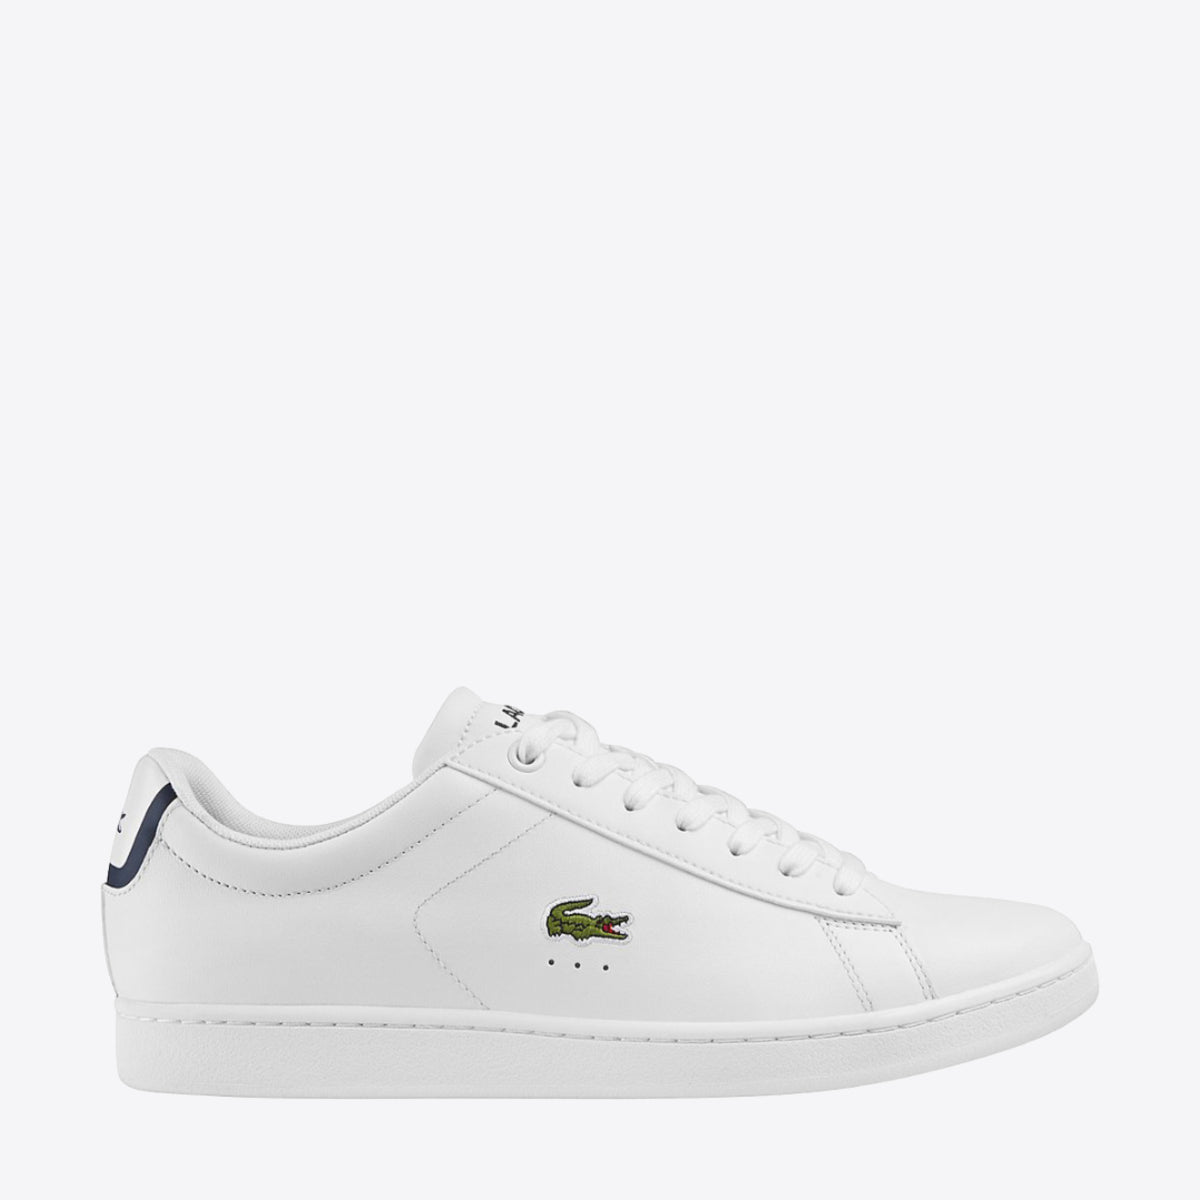 LACOSTE Carnaby Evo Trainer White - Image 2